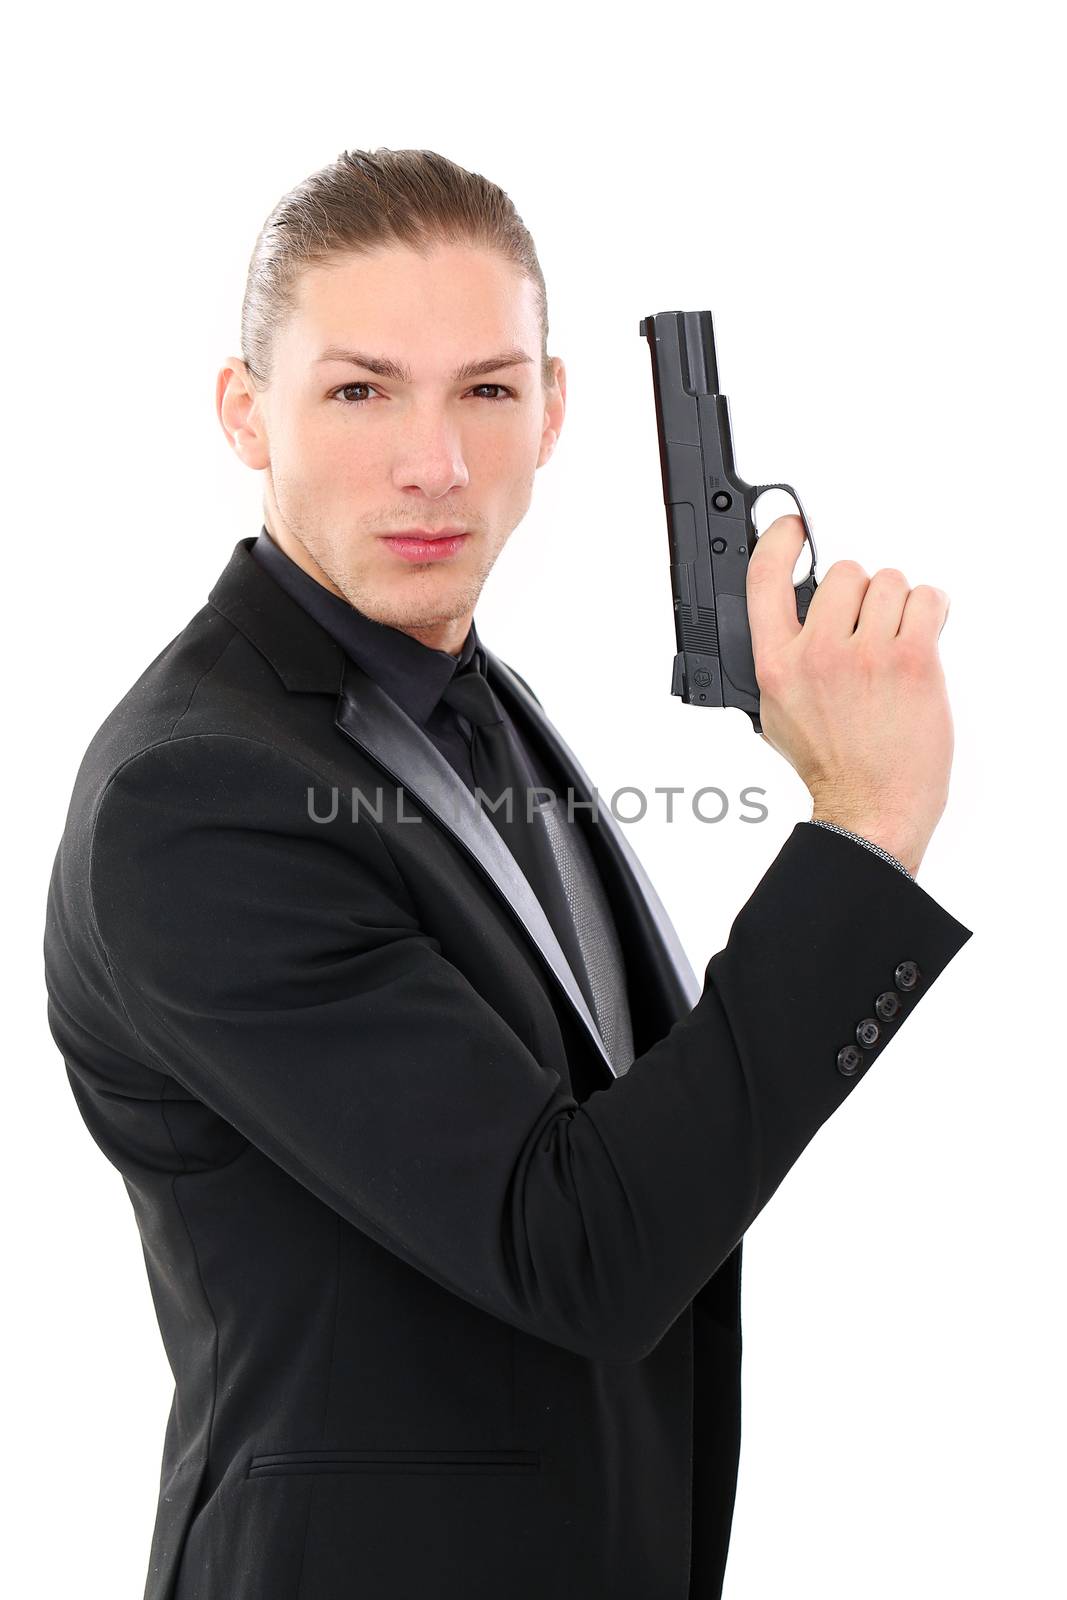 Handsome man in a black suit and a pistol posing over a white background